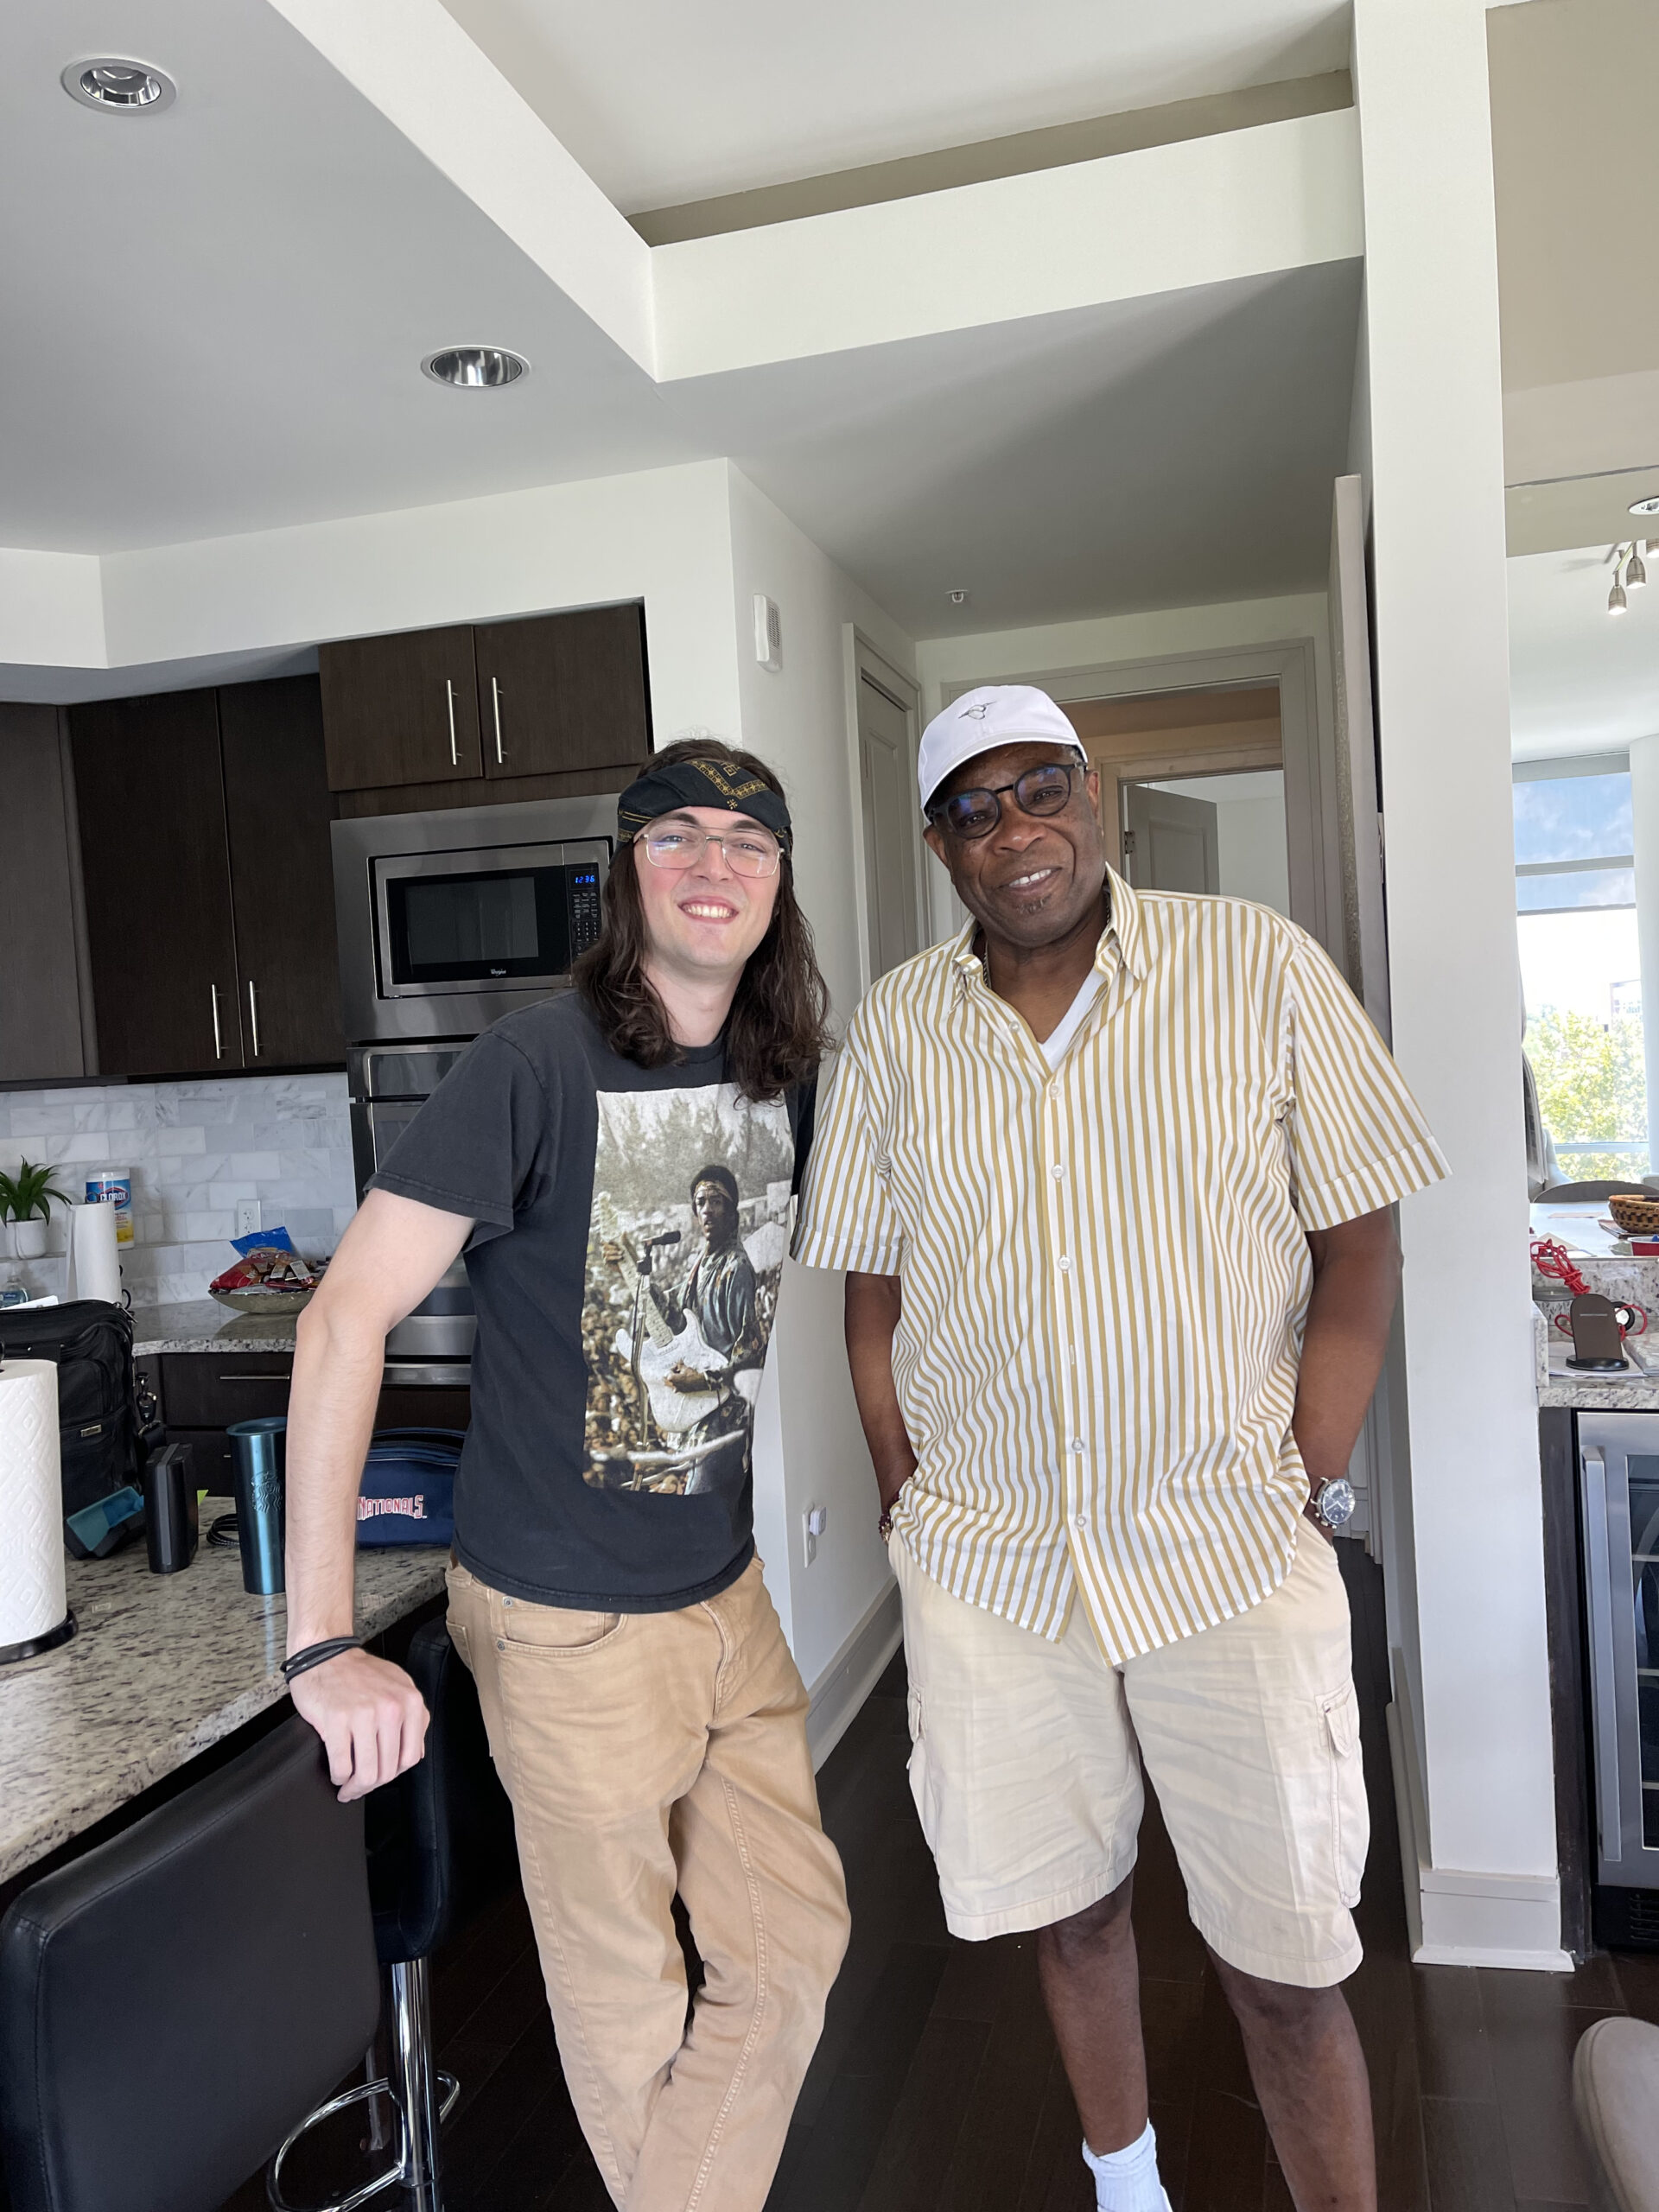 Two men, one younger and fair skinned with long hair and a bandana, the other older and Black with a big grin, pose for a photo in a kitchen.